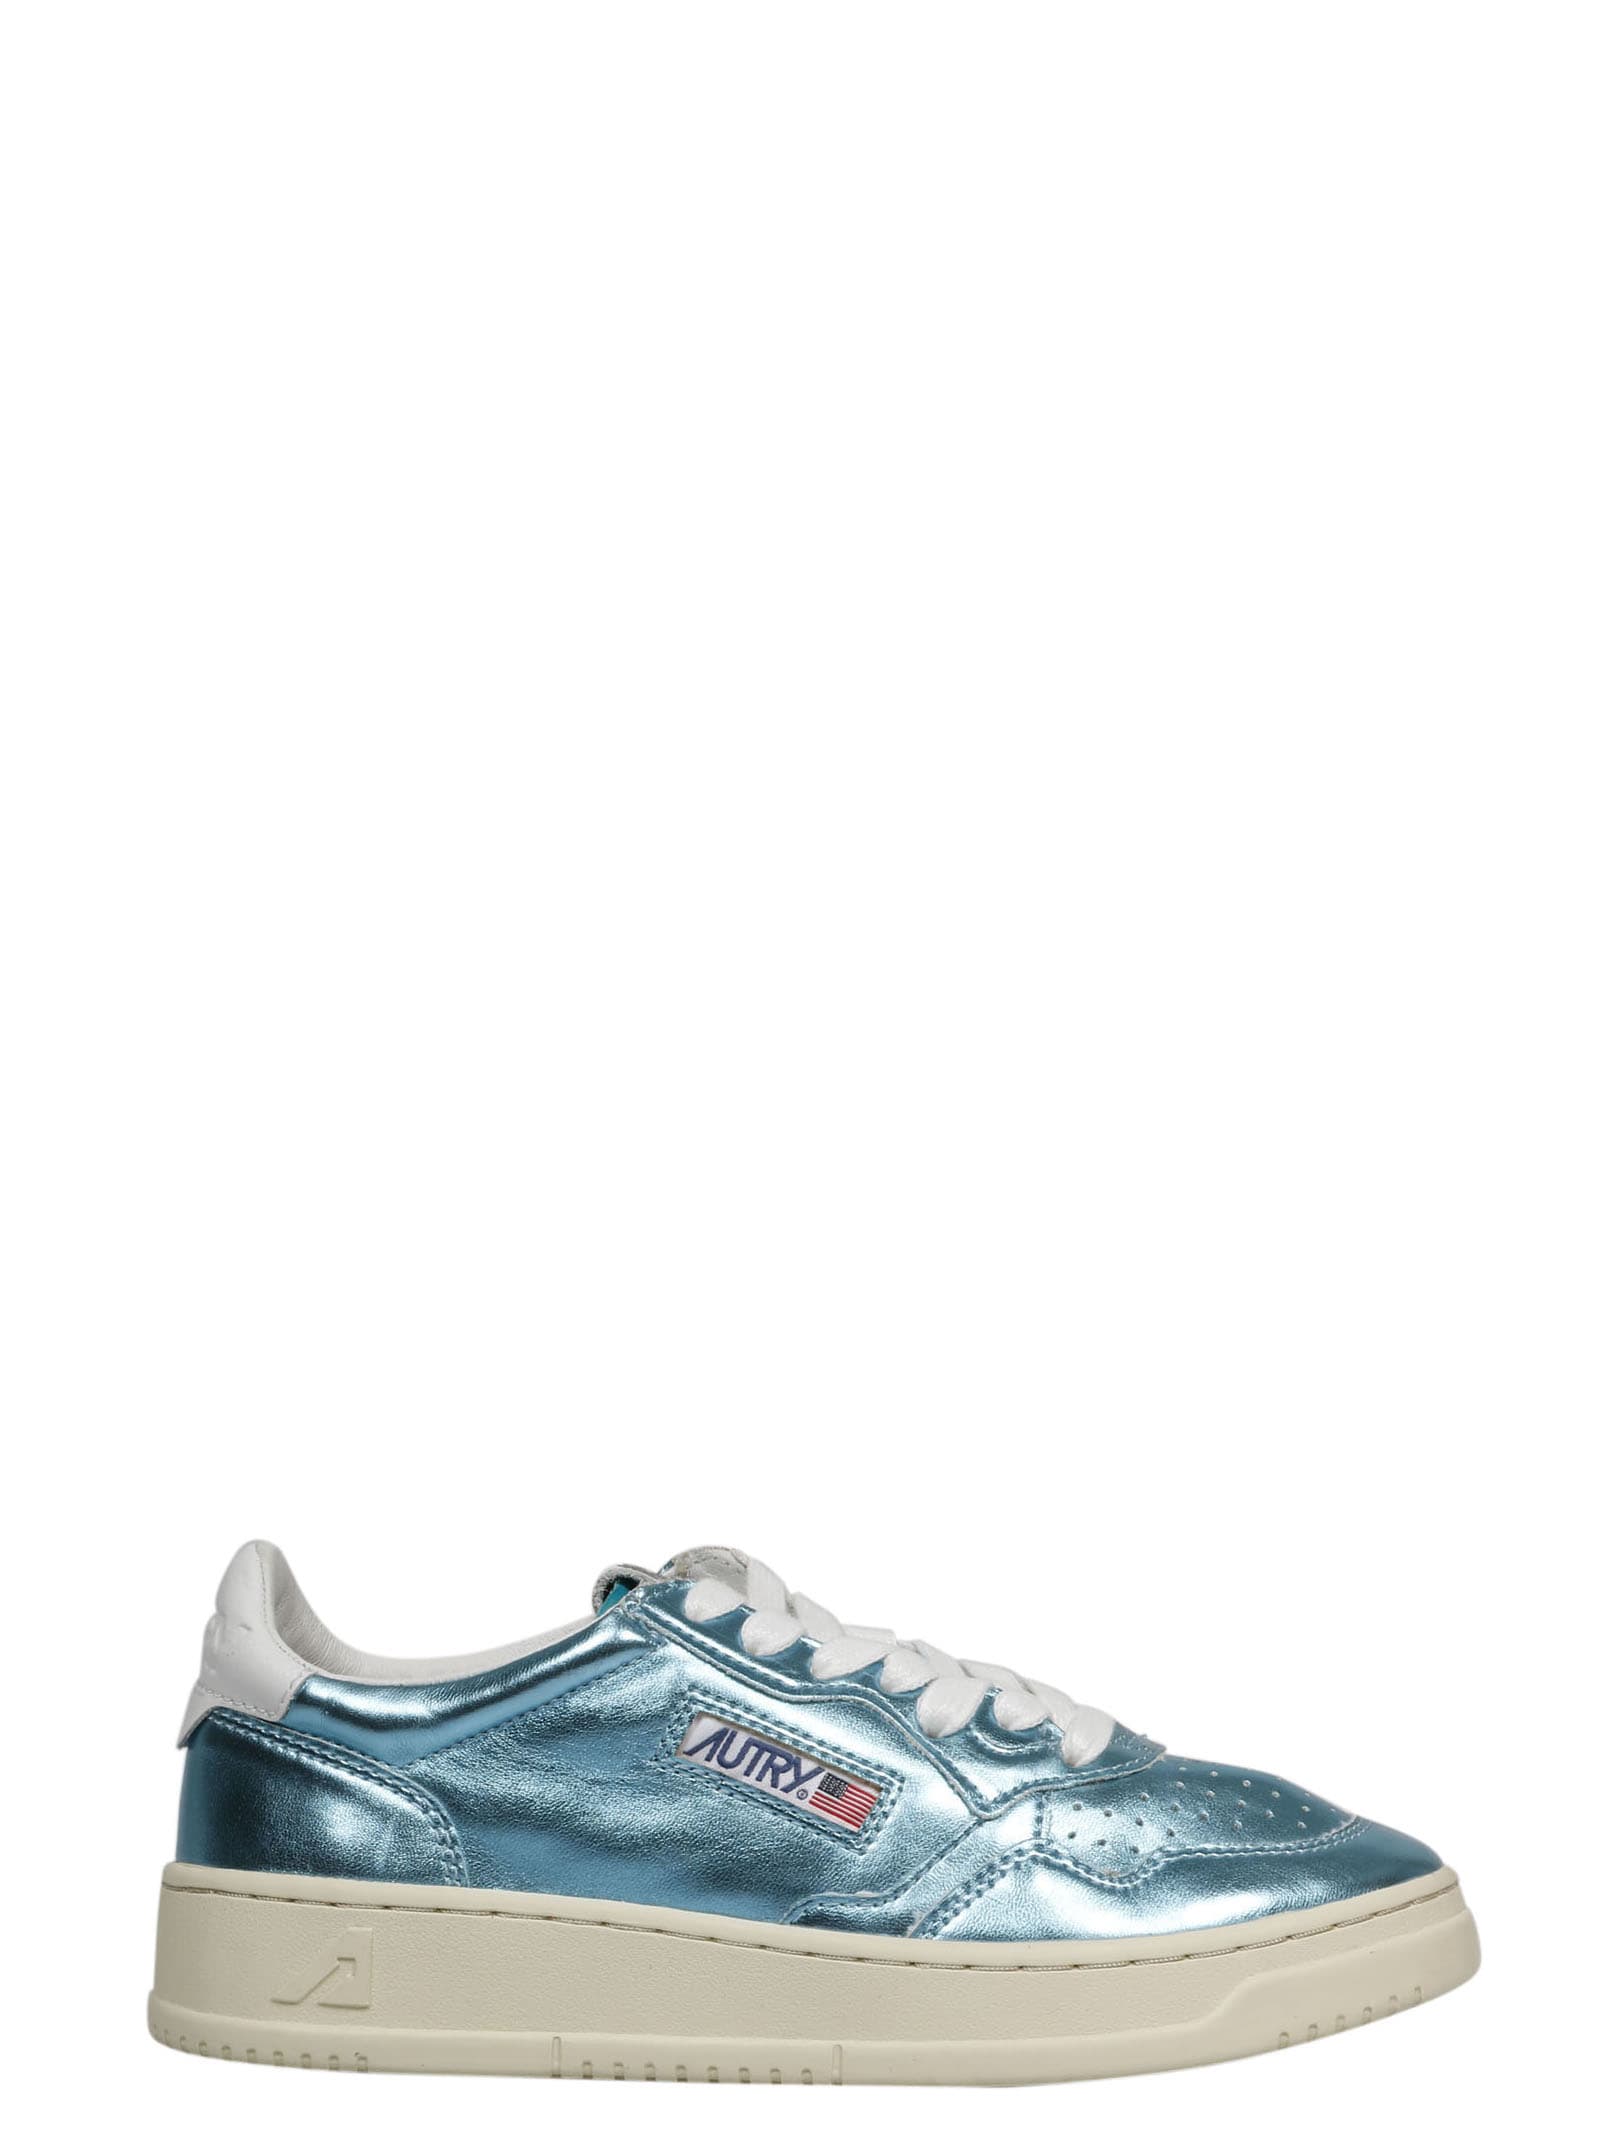 AUTRY LAMINATED 01 SNEAKERS,AULW LM02 LM02